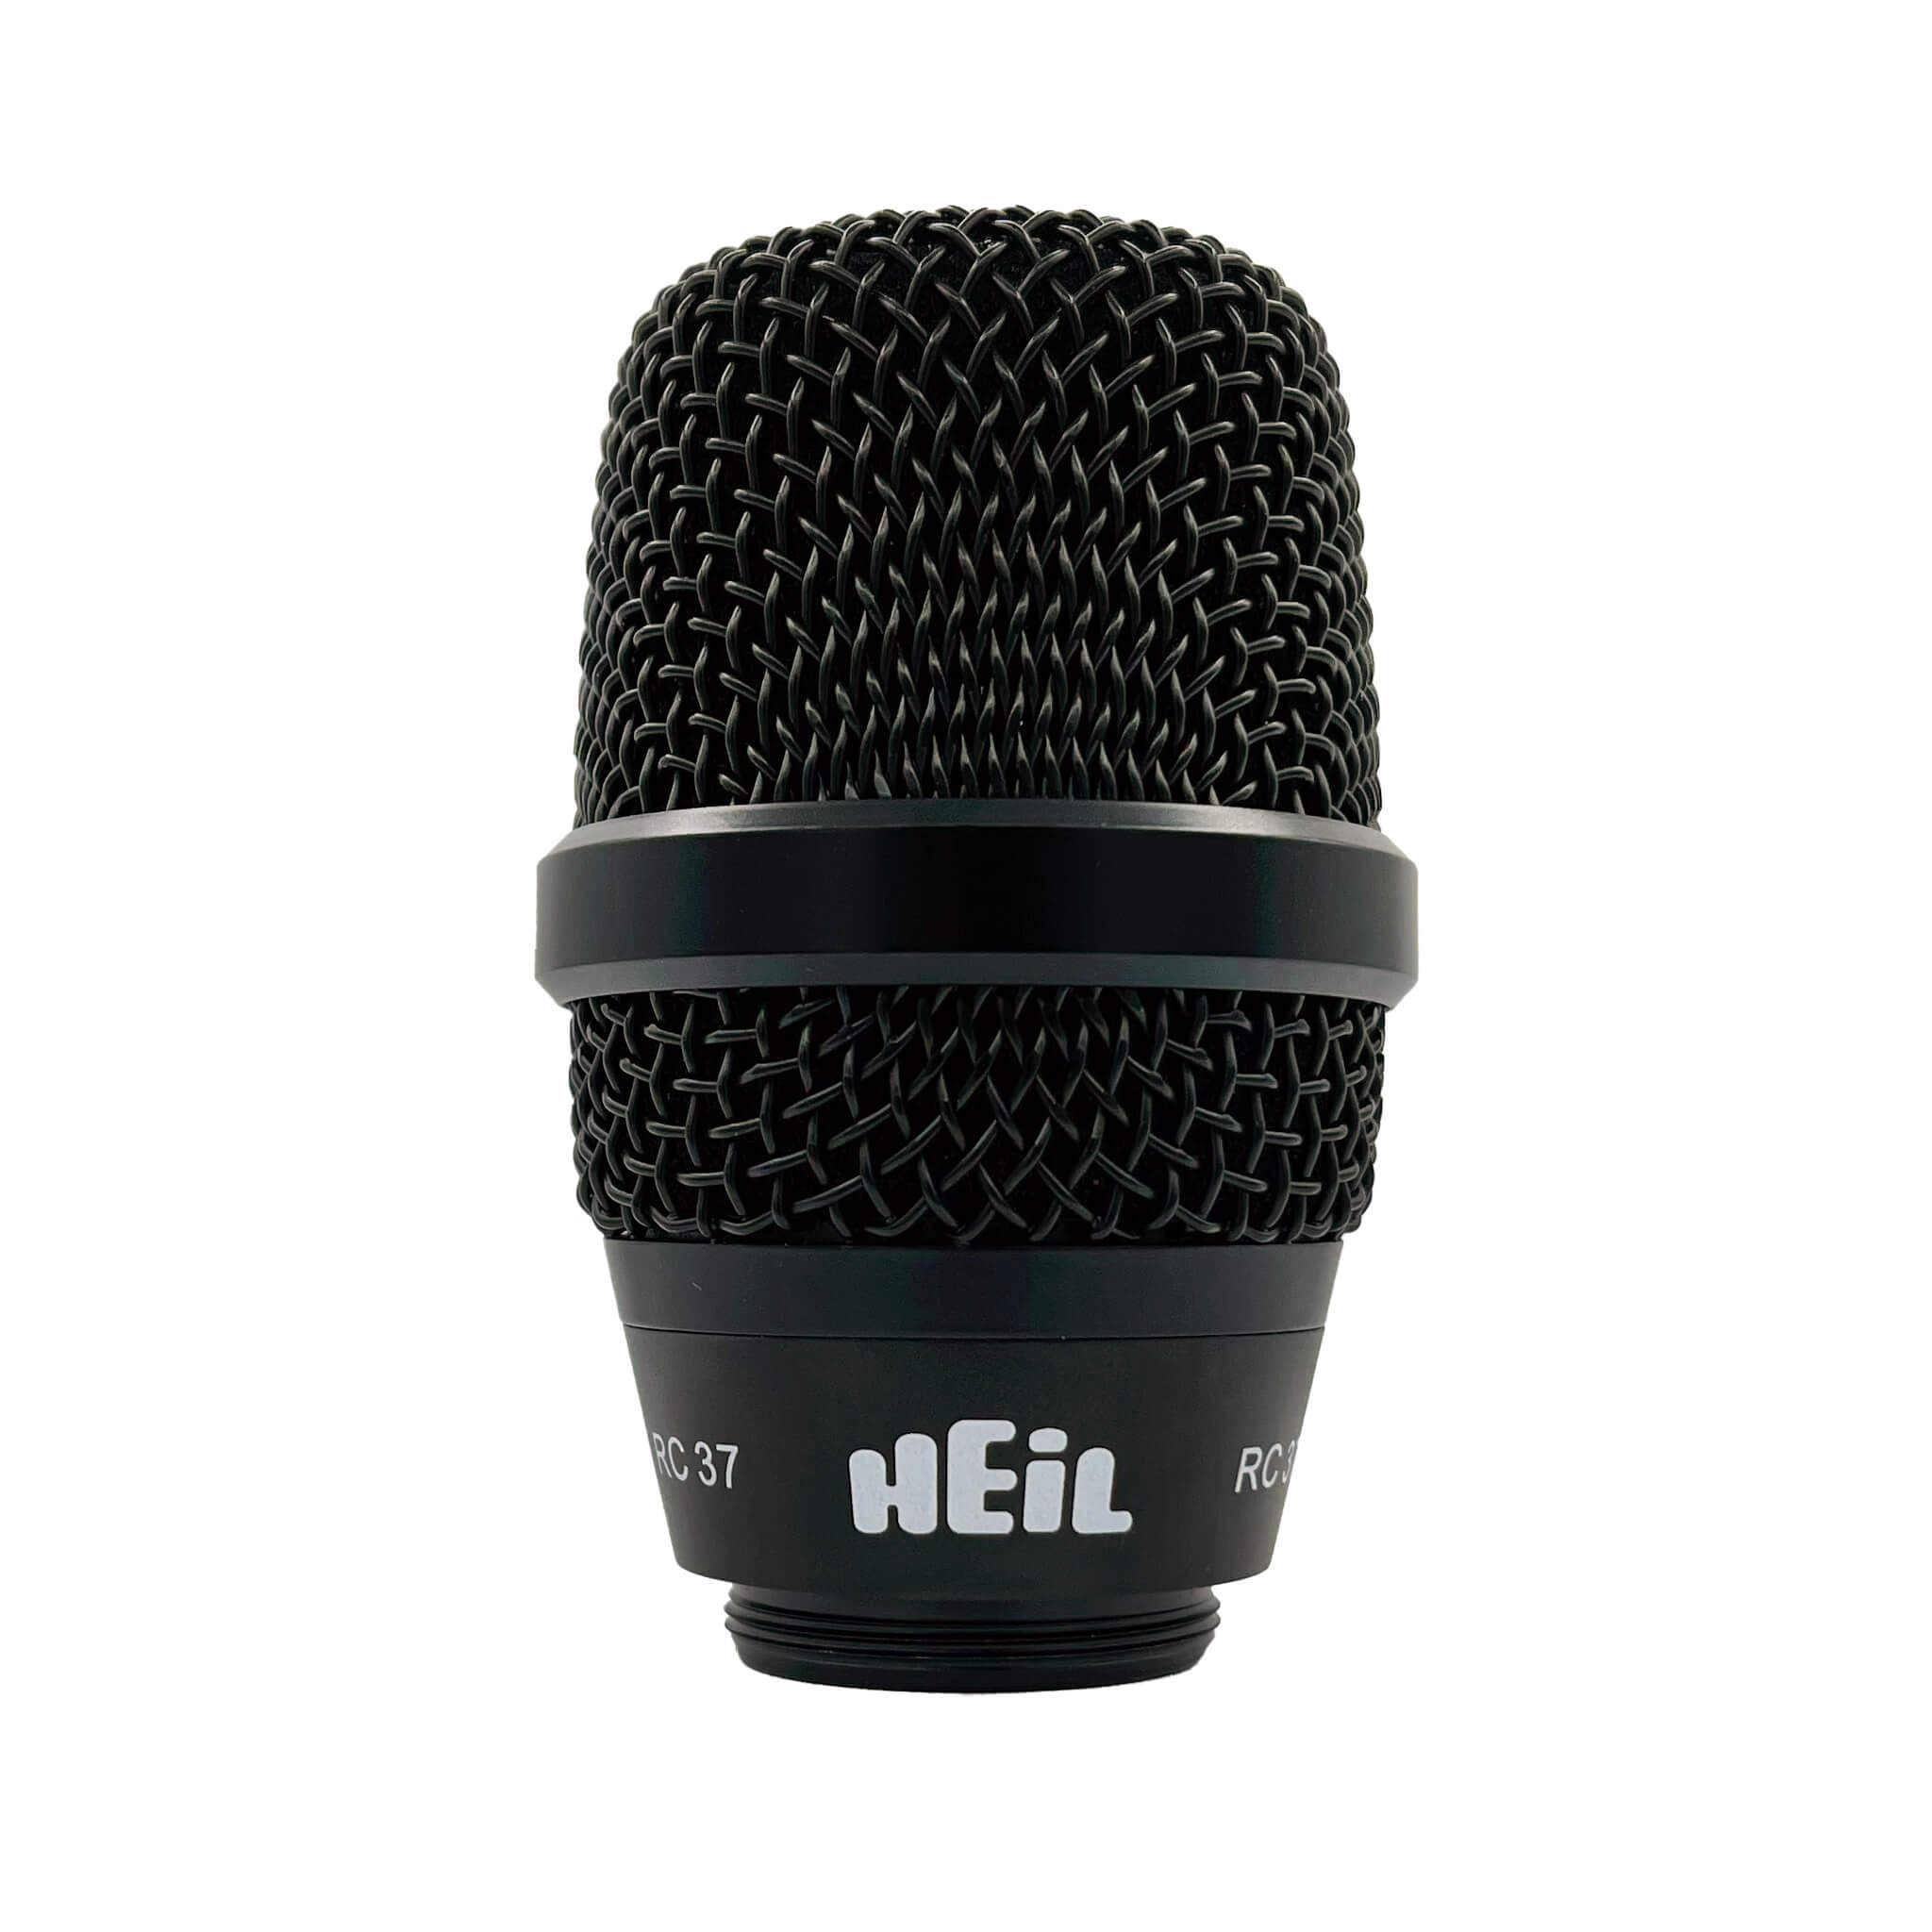 Heil RC 37 Replacement Microphone Capsule